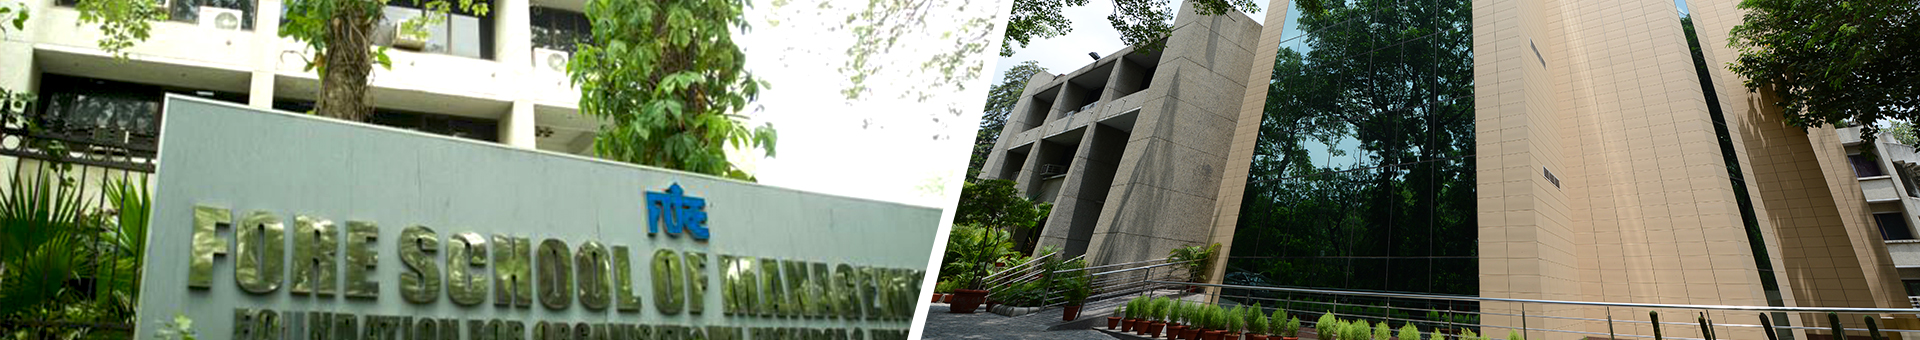 FORE School of Management , Delhi Ncr